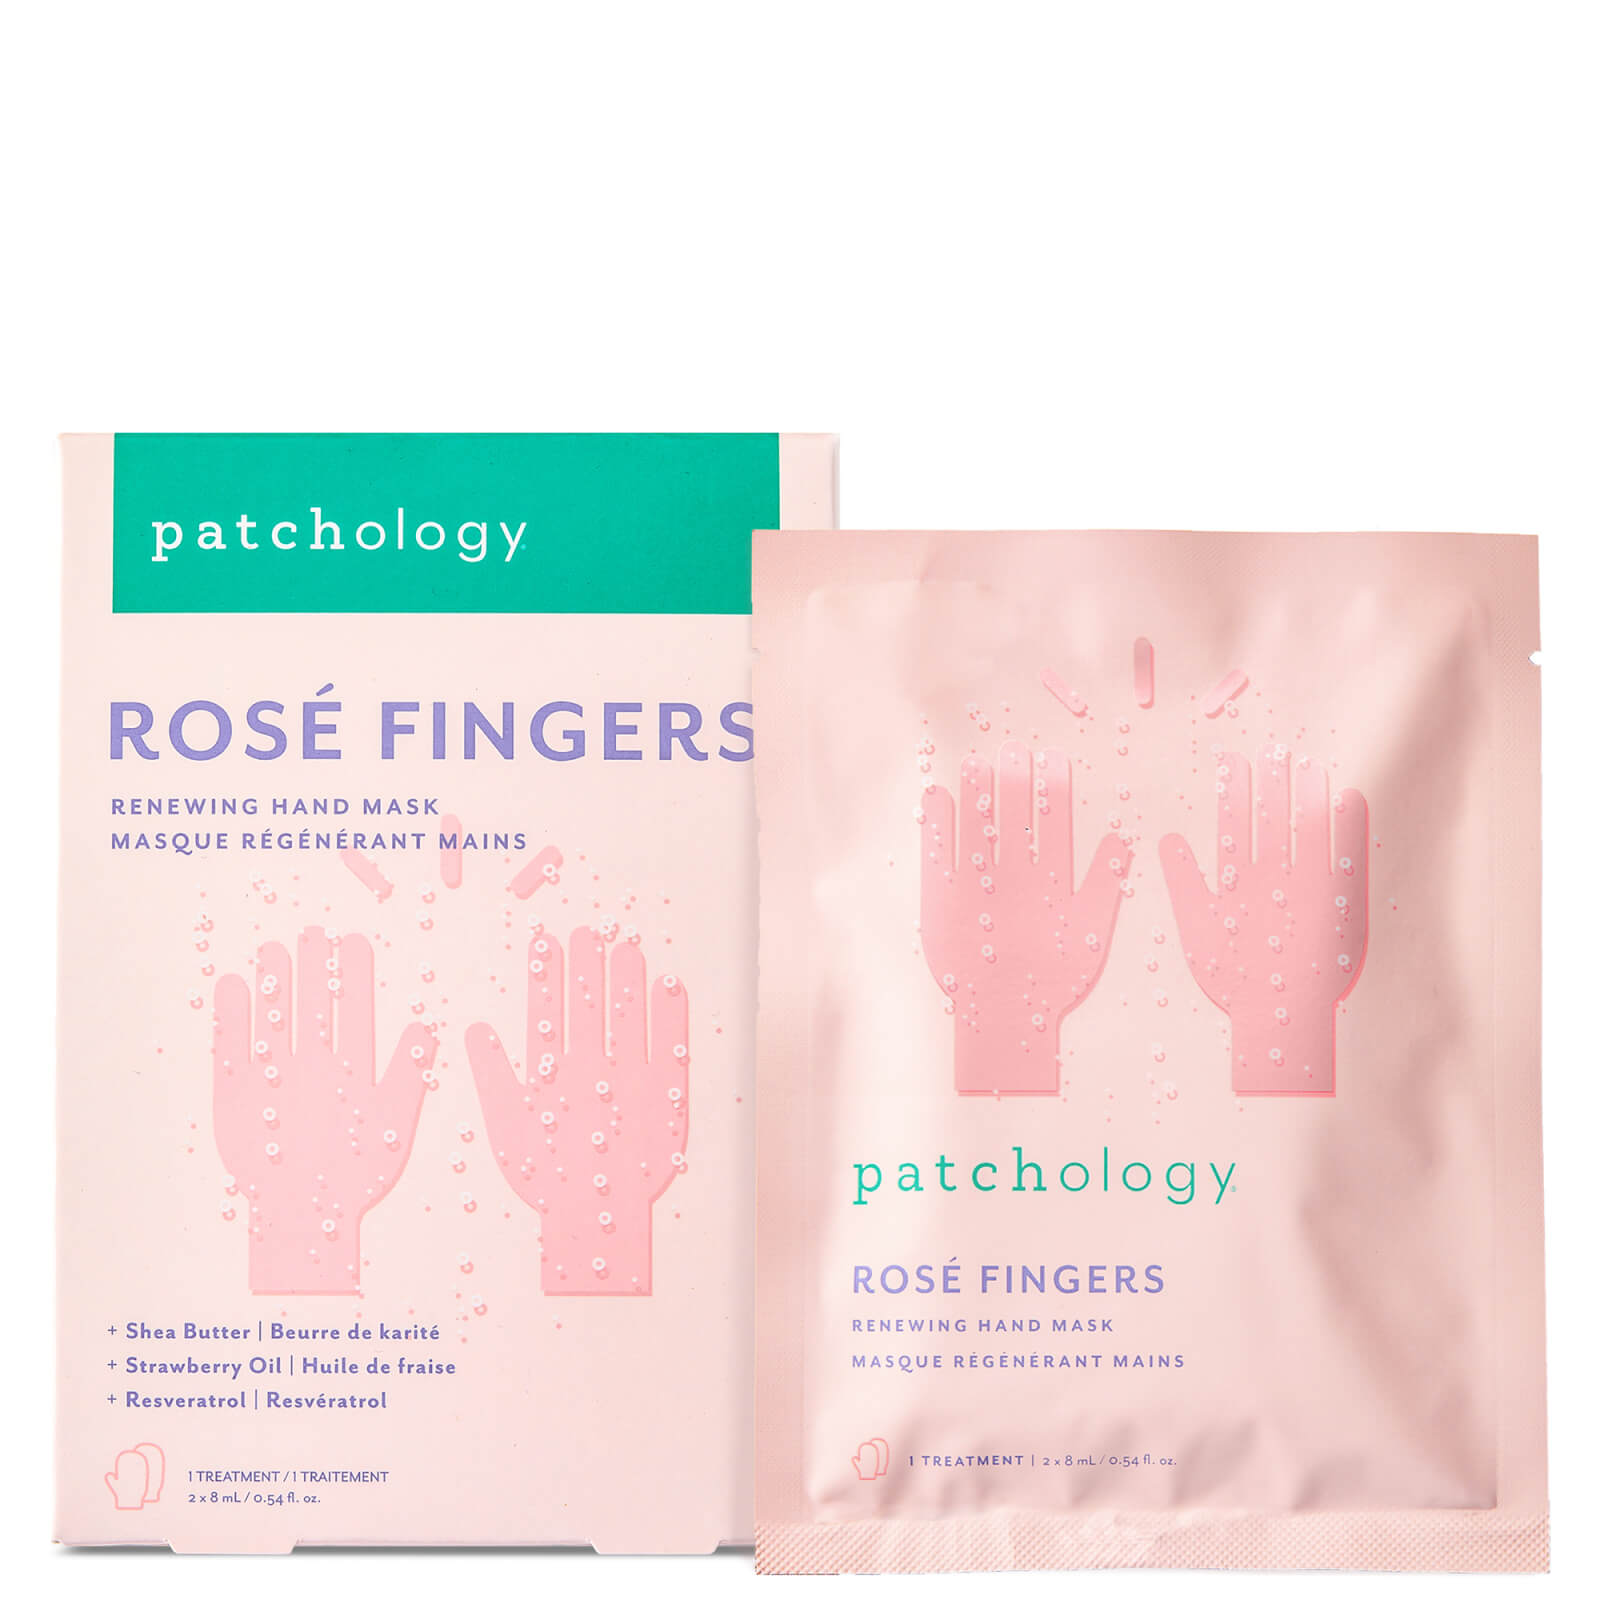 Patchology Rose Fingers - Renewing Hand Mask 54g